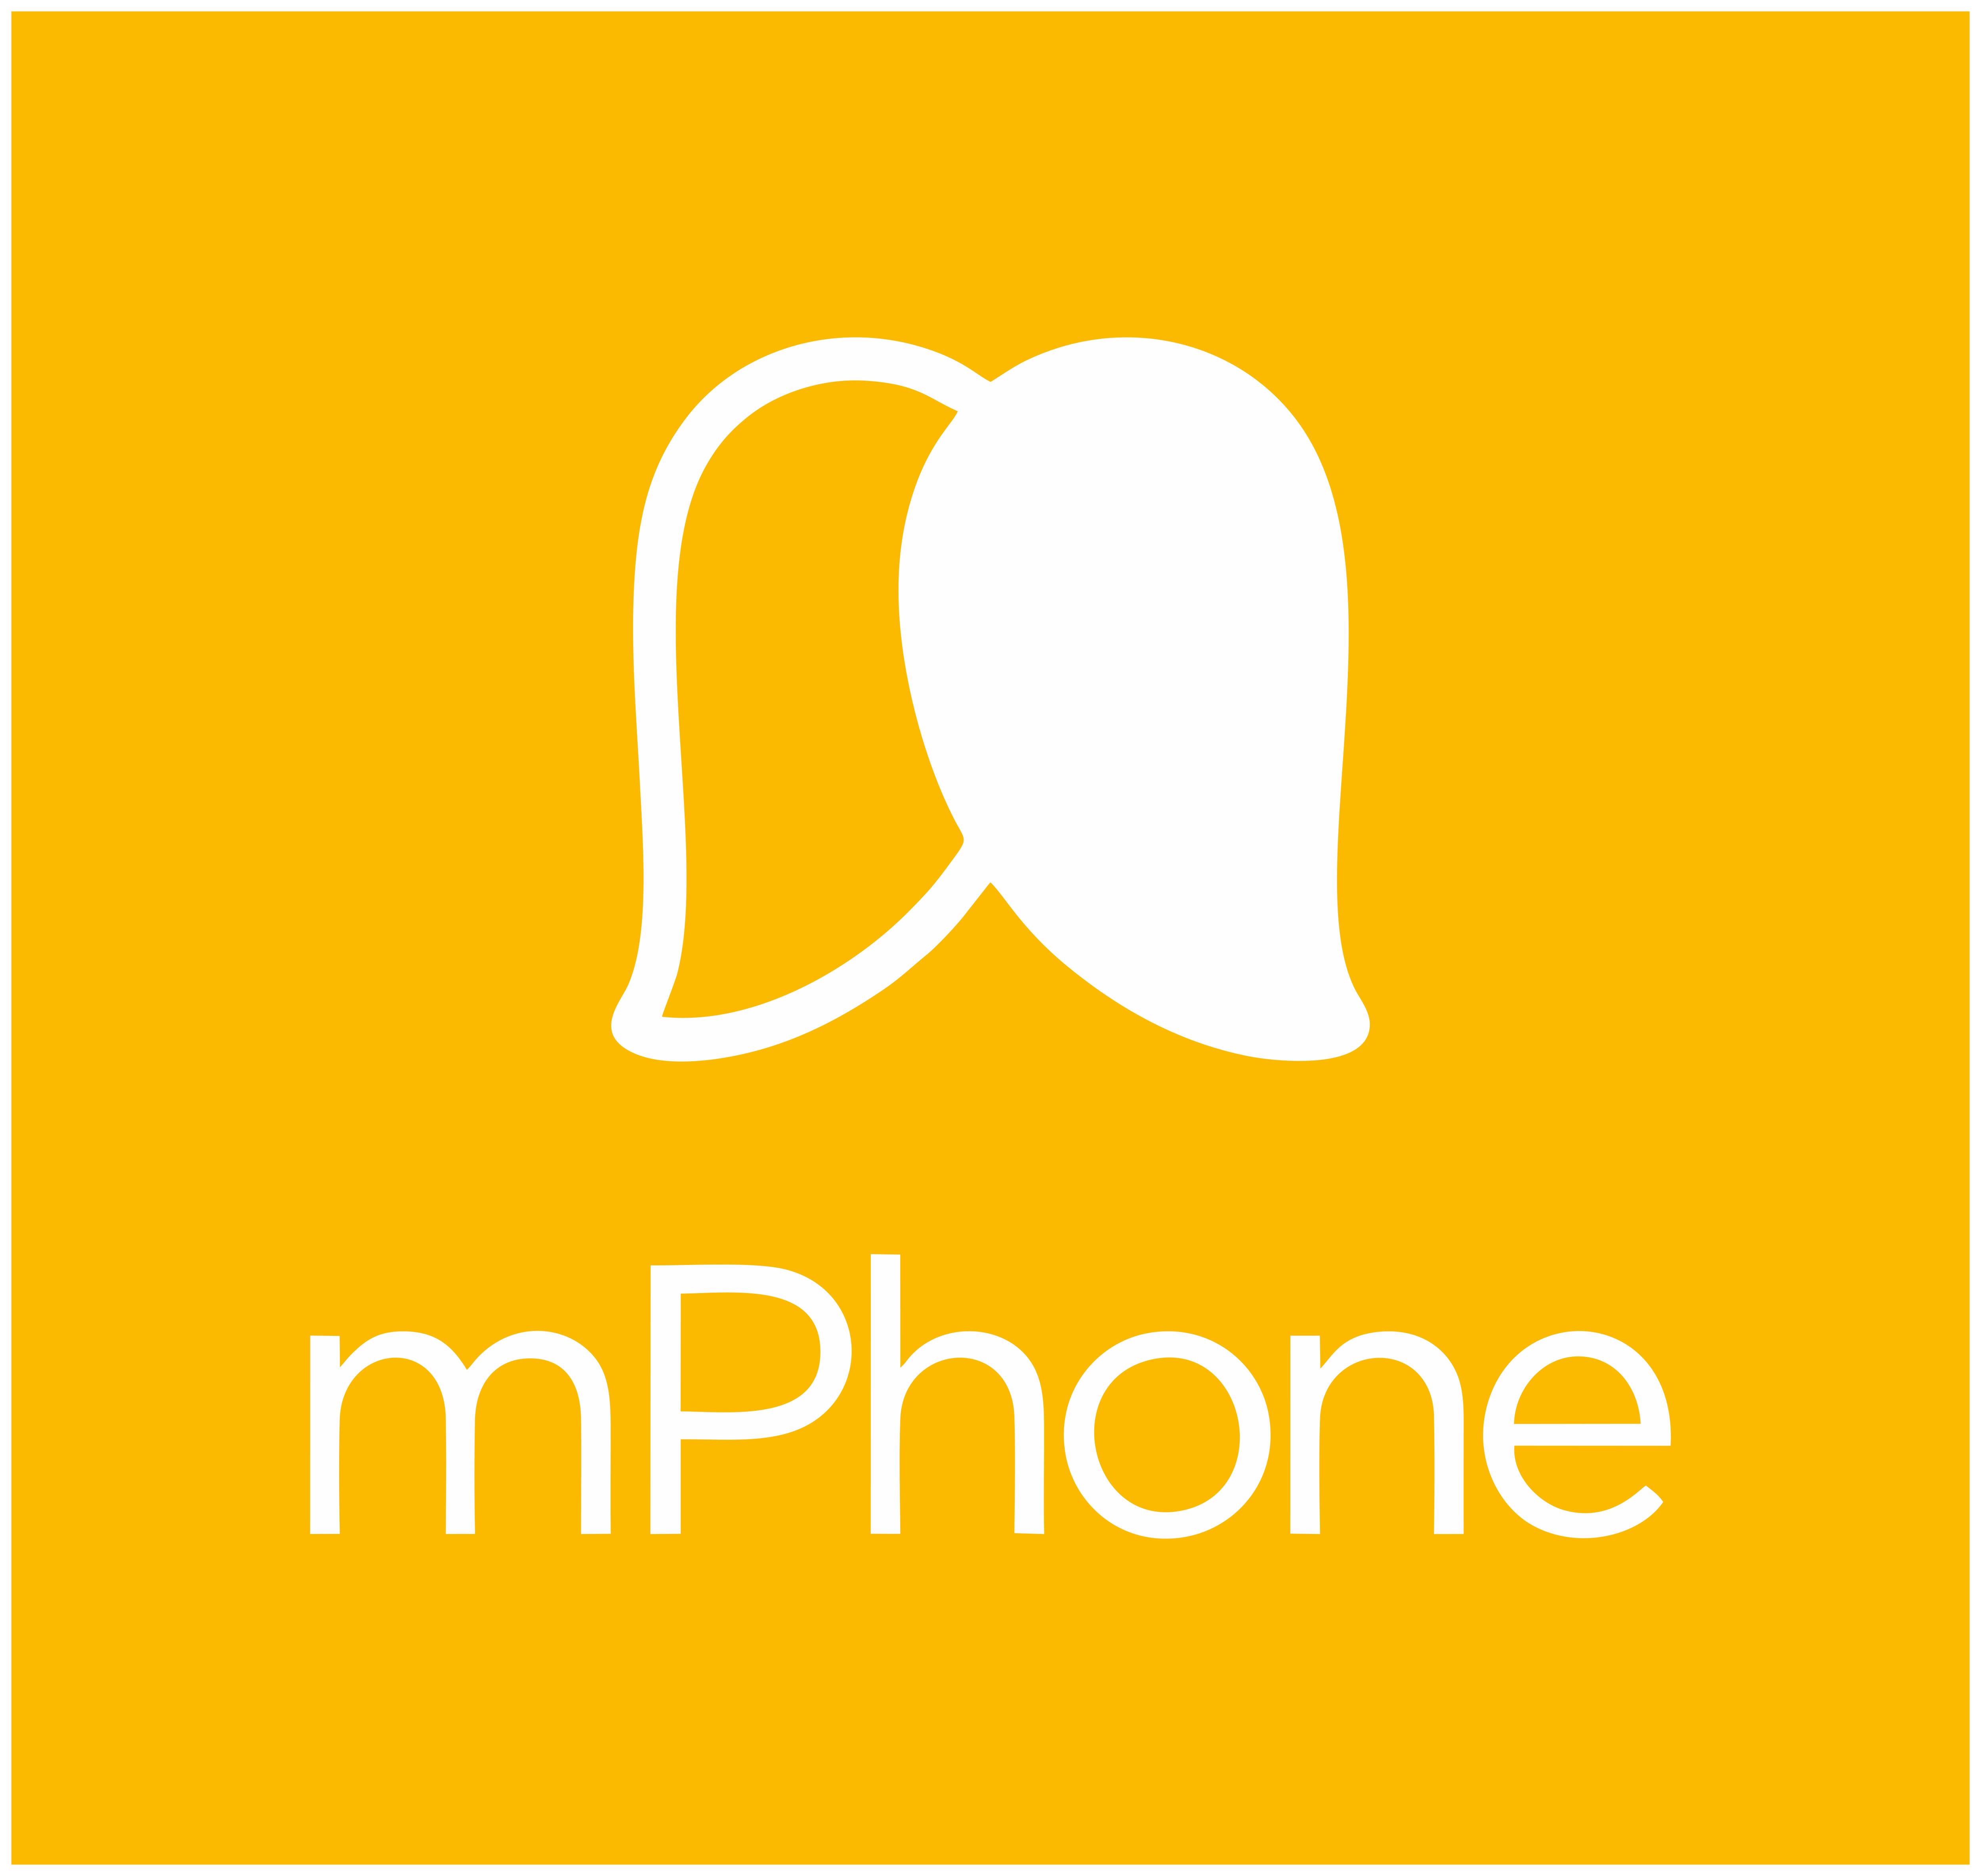 mPhone is launching new operating system for mobiles and laptops